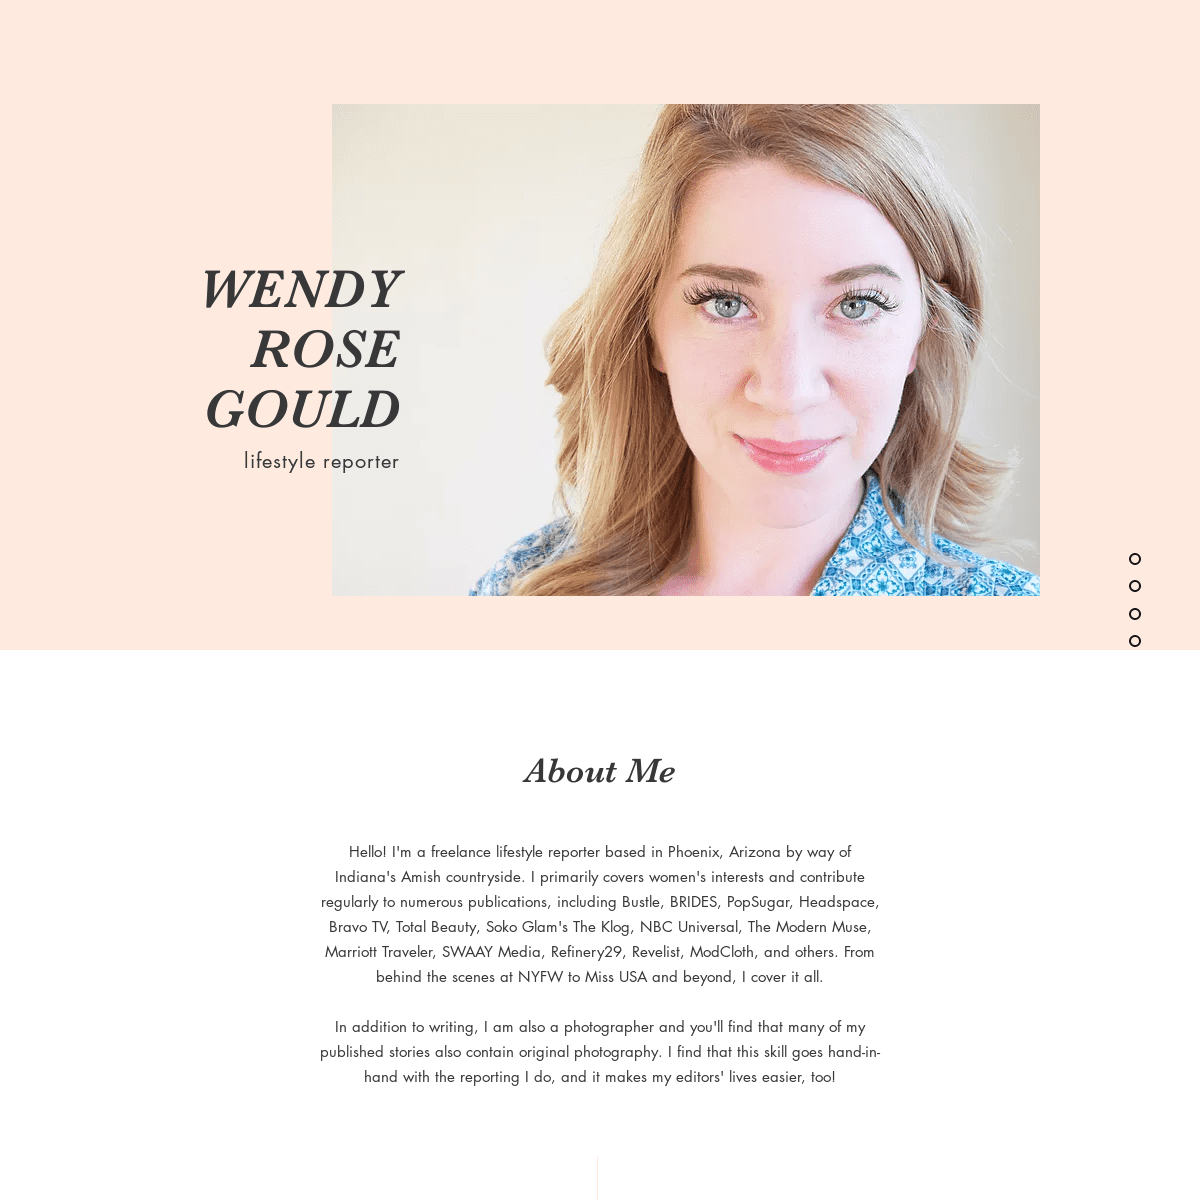 Wendy Rose Gould lifestyle reporter